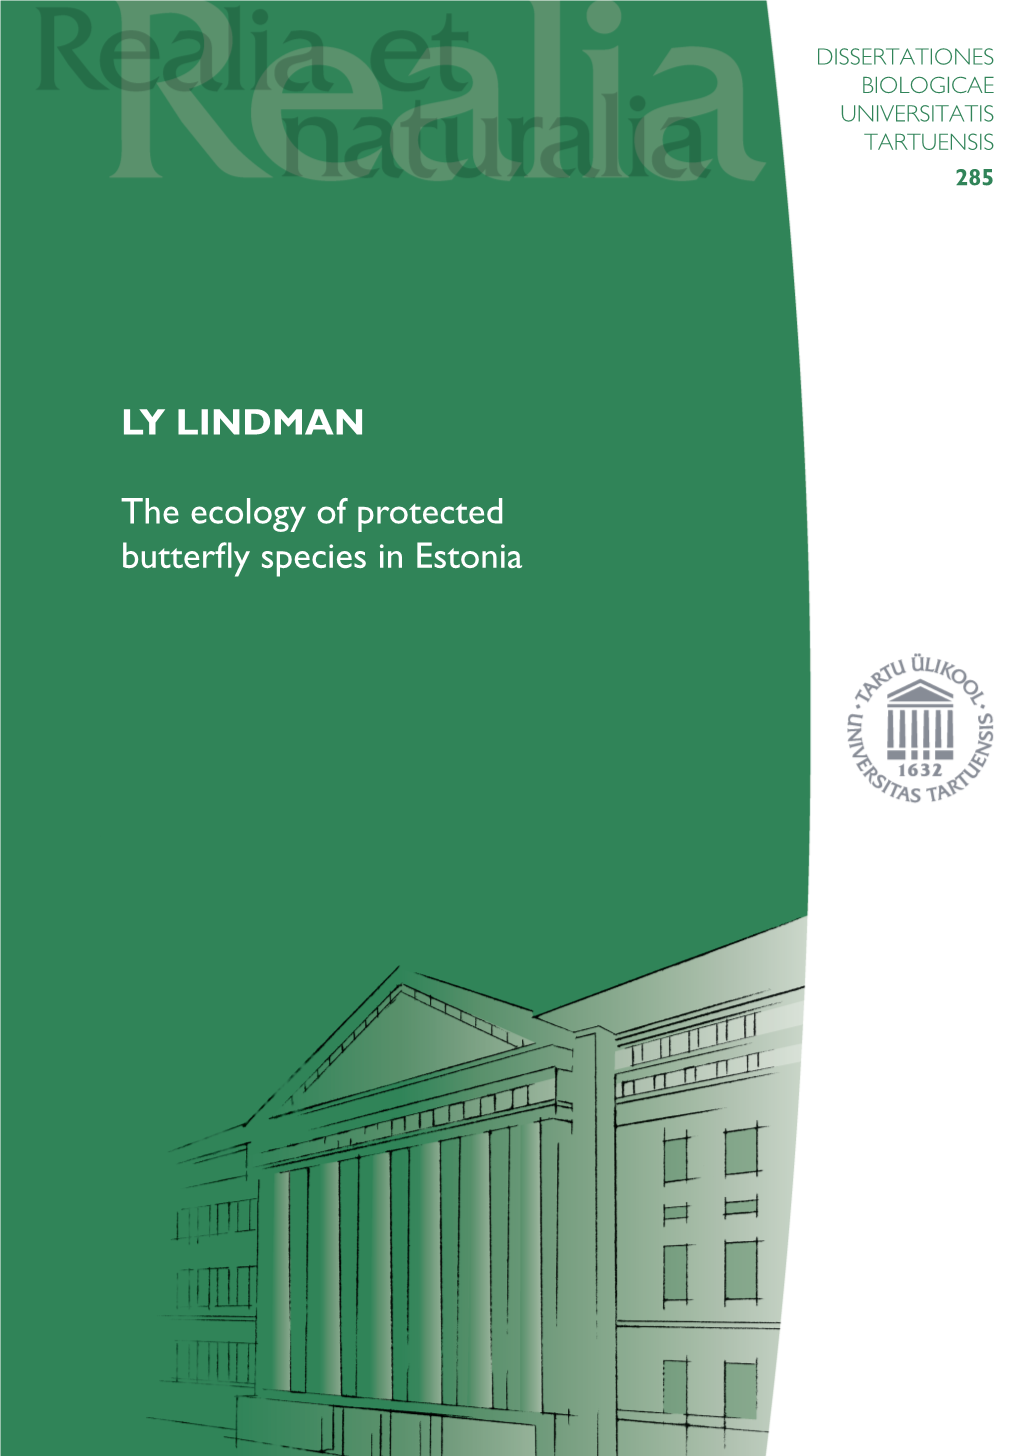 LY LINDMAN the Ecology of Protected Butterfly Species in Estonia